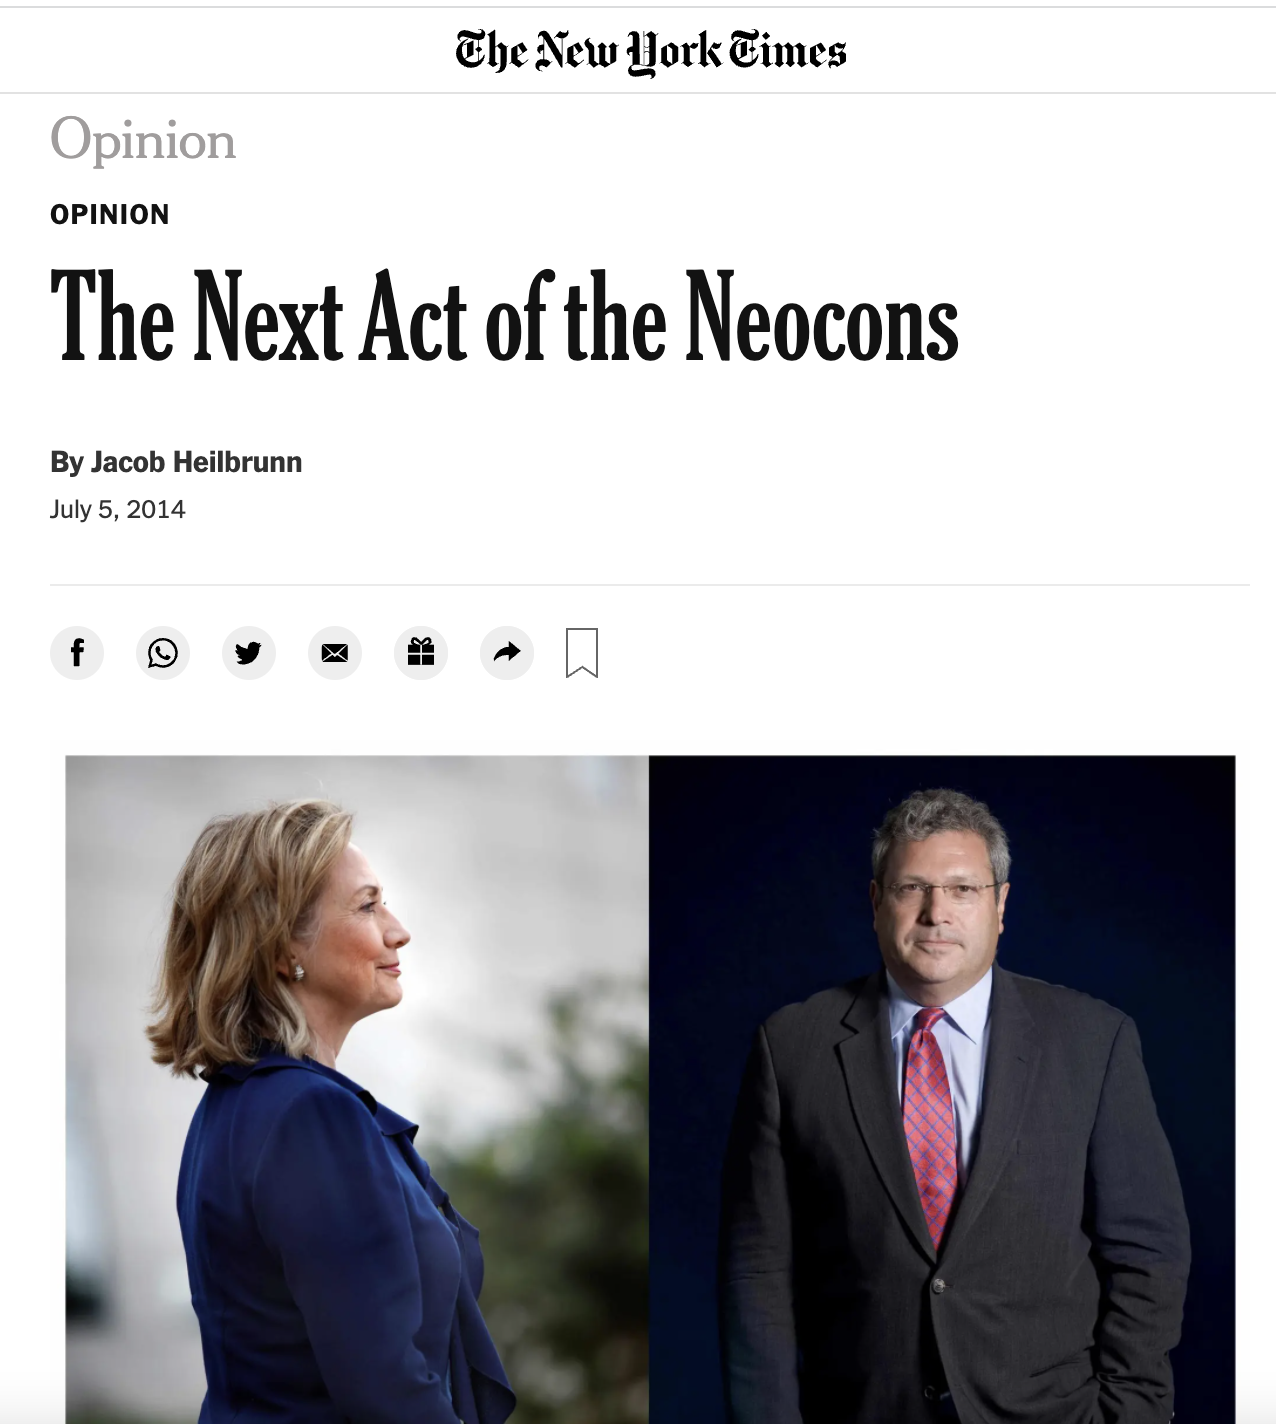 New York Times - The Next Act of the Neocons